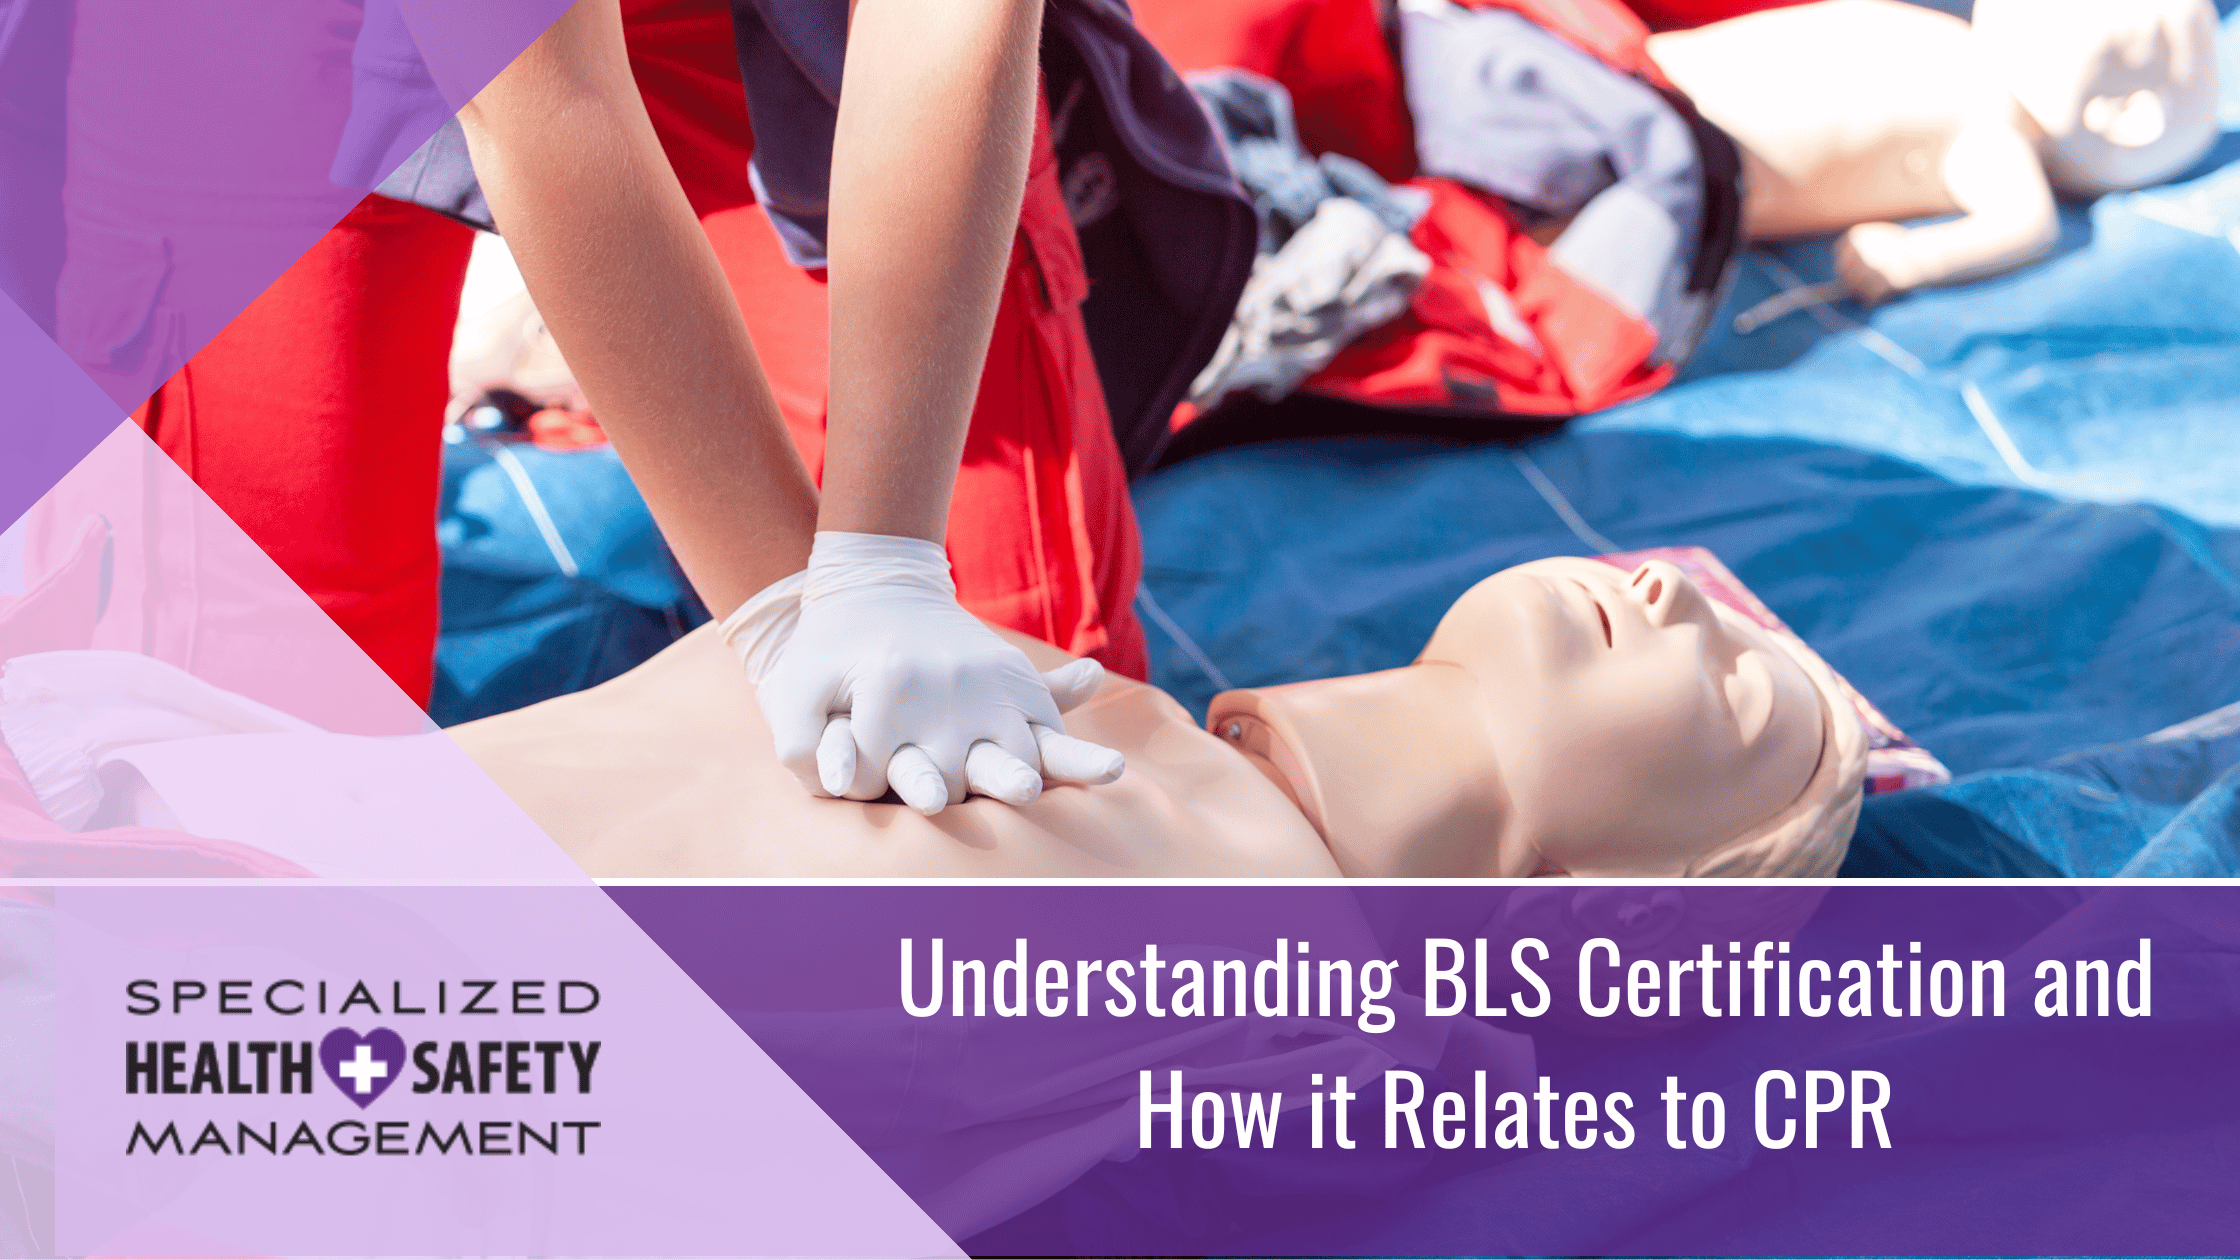 Featured image for “Understanding BLS Certification and Its Relation to CPR”